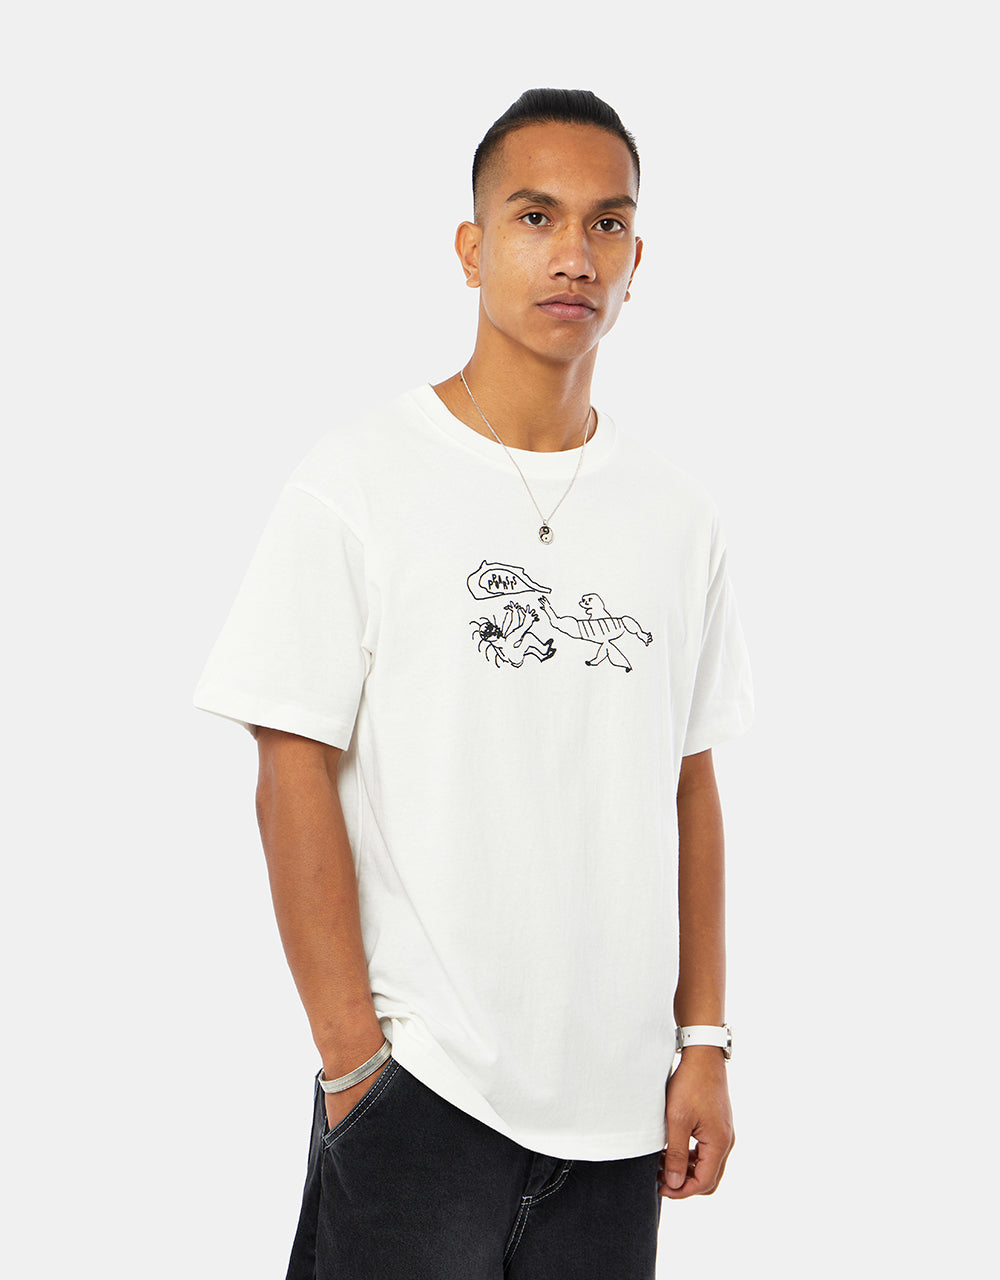 Pass Port Many Faces T-Shirt - White